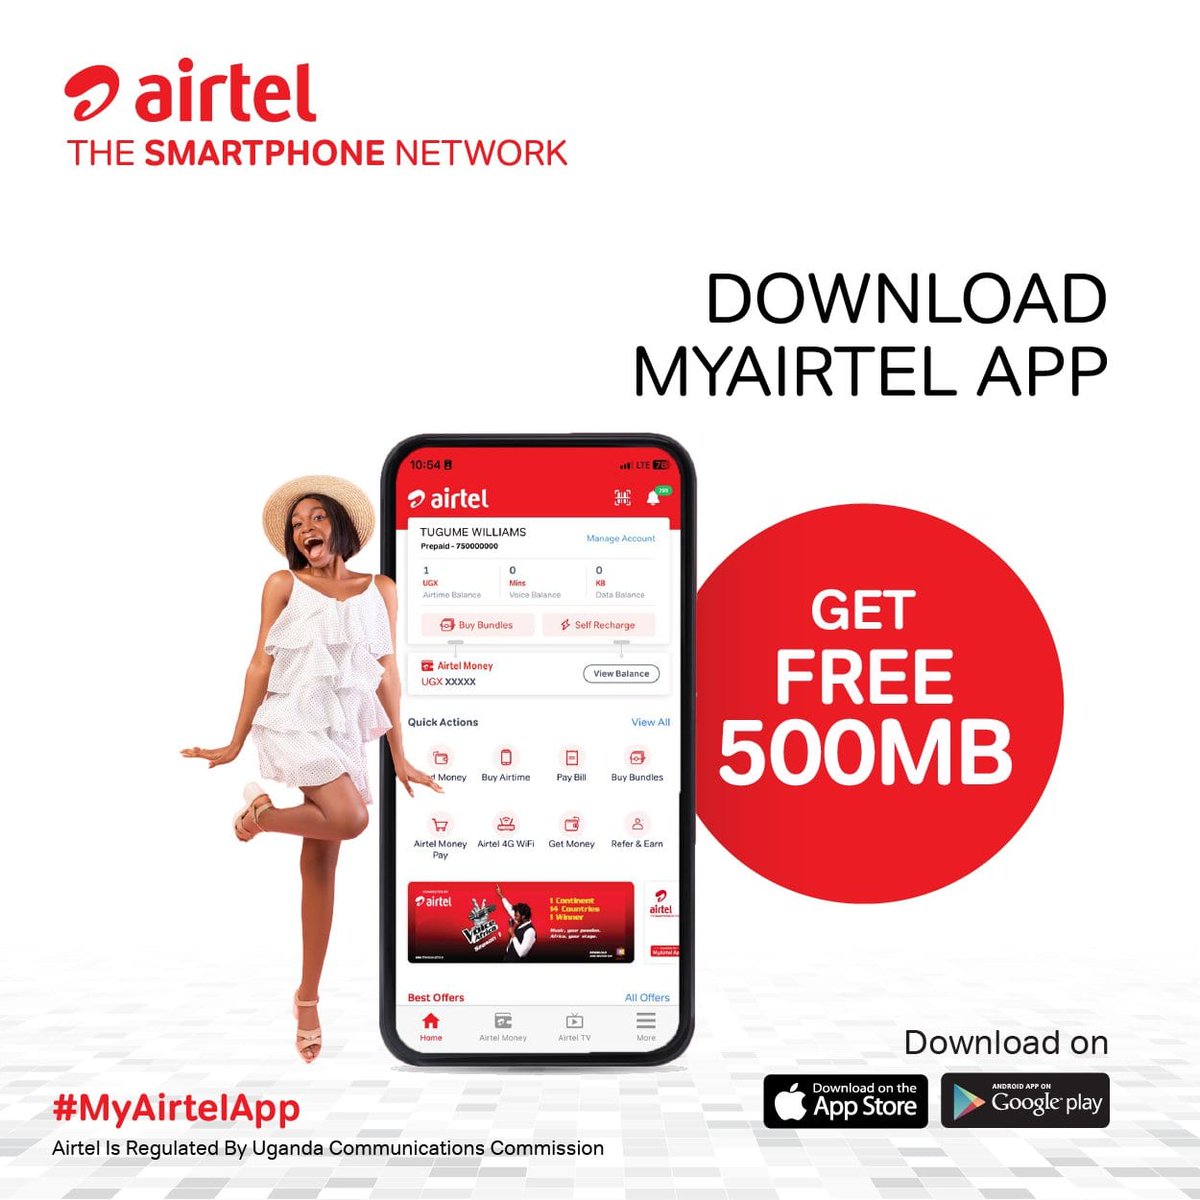 Running out of data ?! Download the My Airtel App, register and get free 500MBs instantly. Tell your friend to tell a friend 😉

#MyAirtelApp